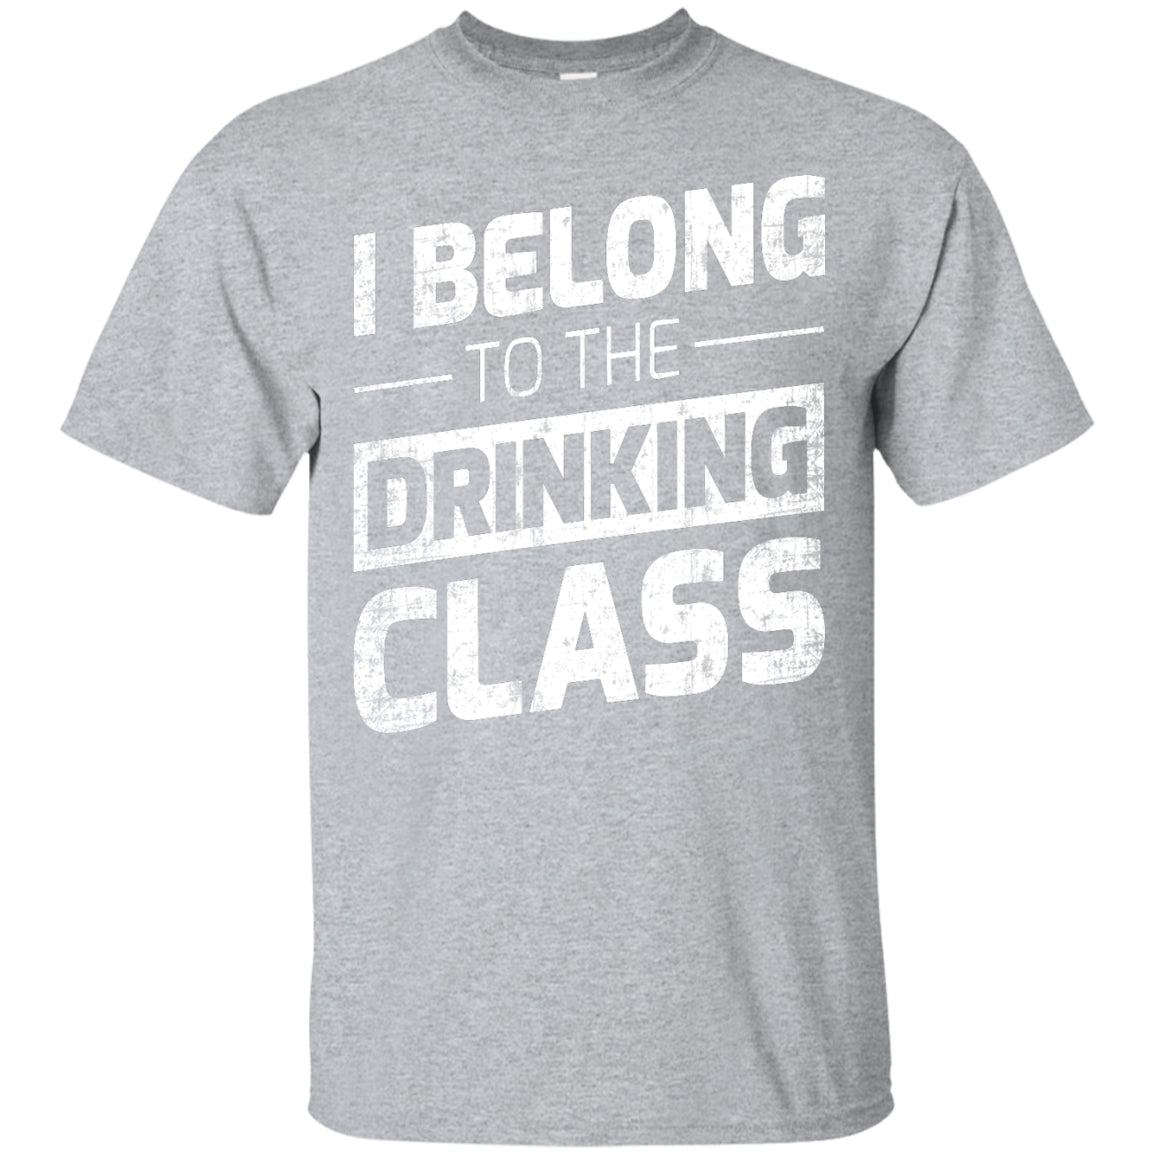 I Belong To The Drinking Class T-Shirt Apparel - The Beer Lodge